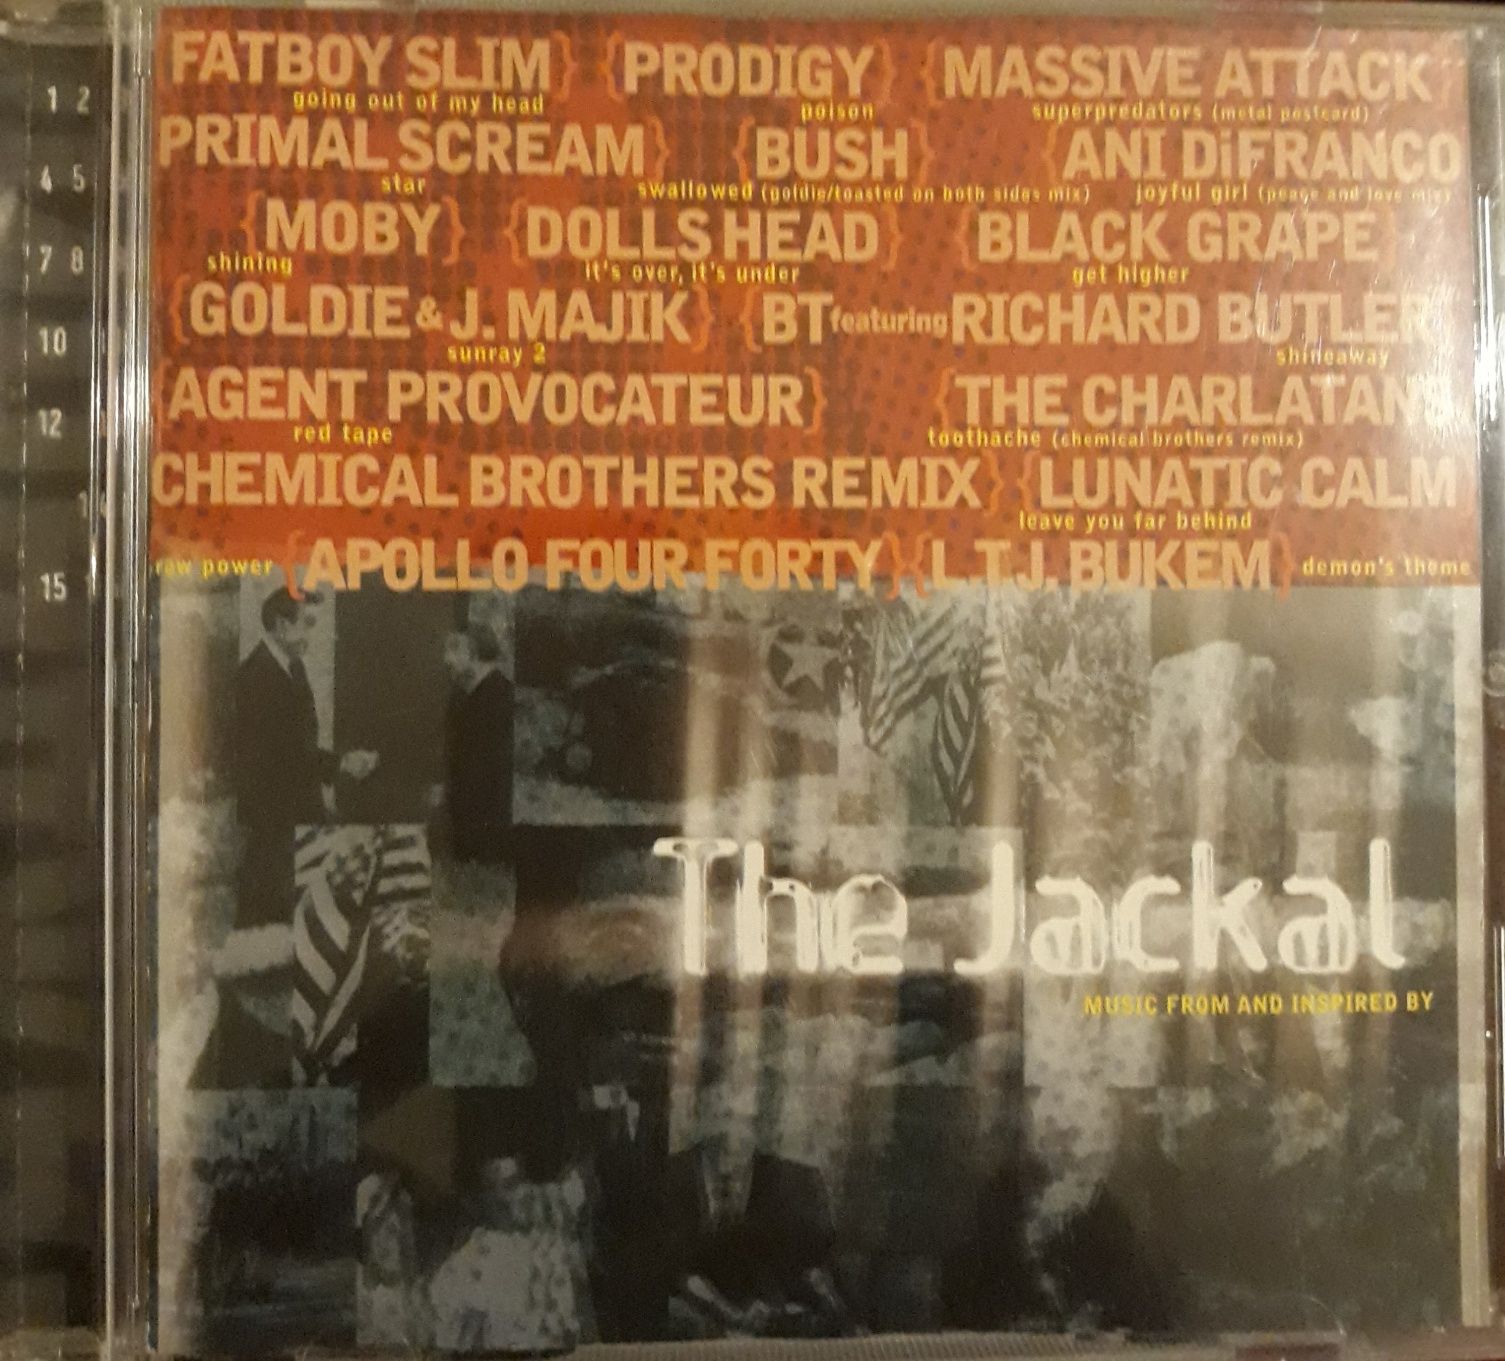 CD The Jackal OST (Prodigy,Chemical Brothers,Moby,Bush,Massive Attack)